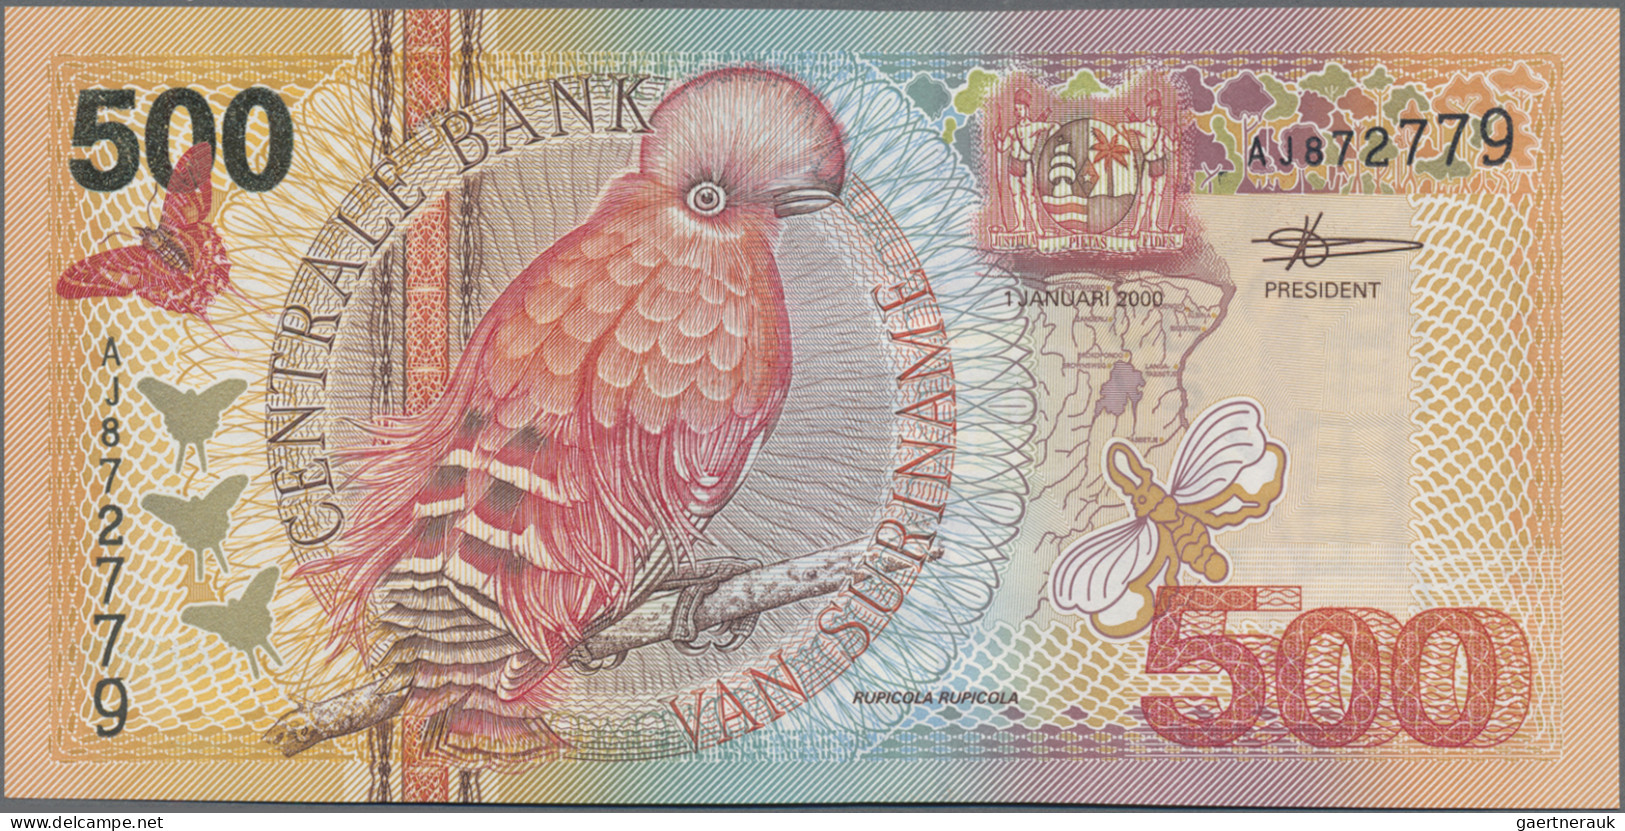 Suriname: Central Bank van Suriname, complete set of the animal series 2000, wit